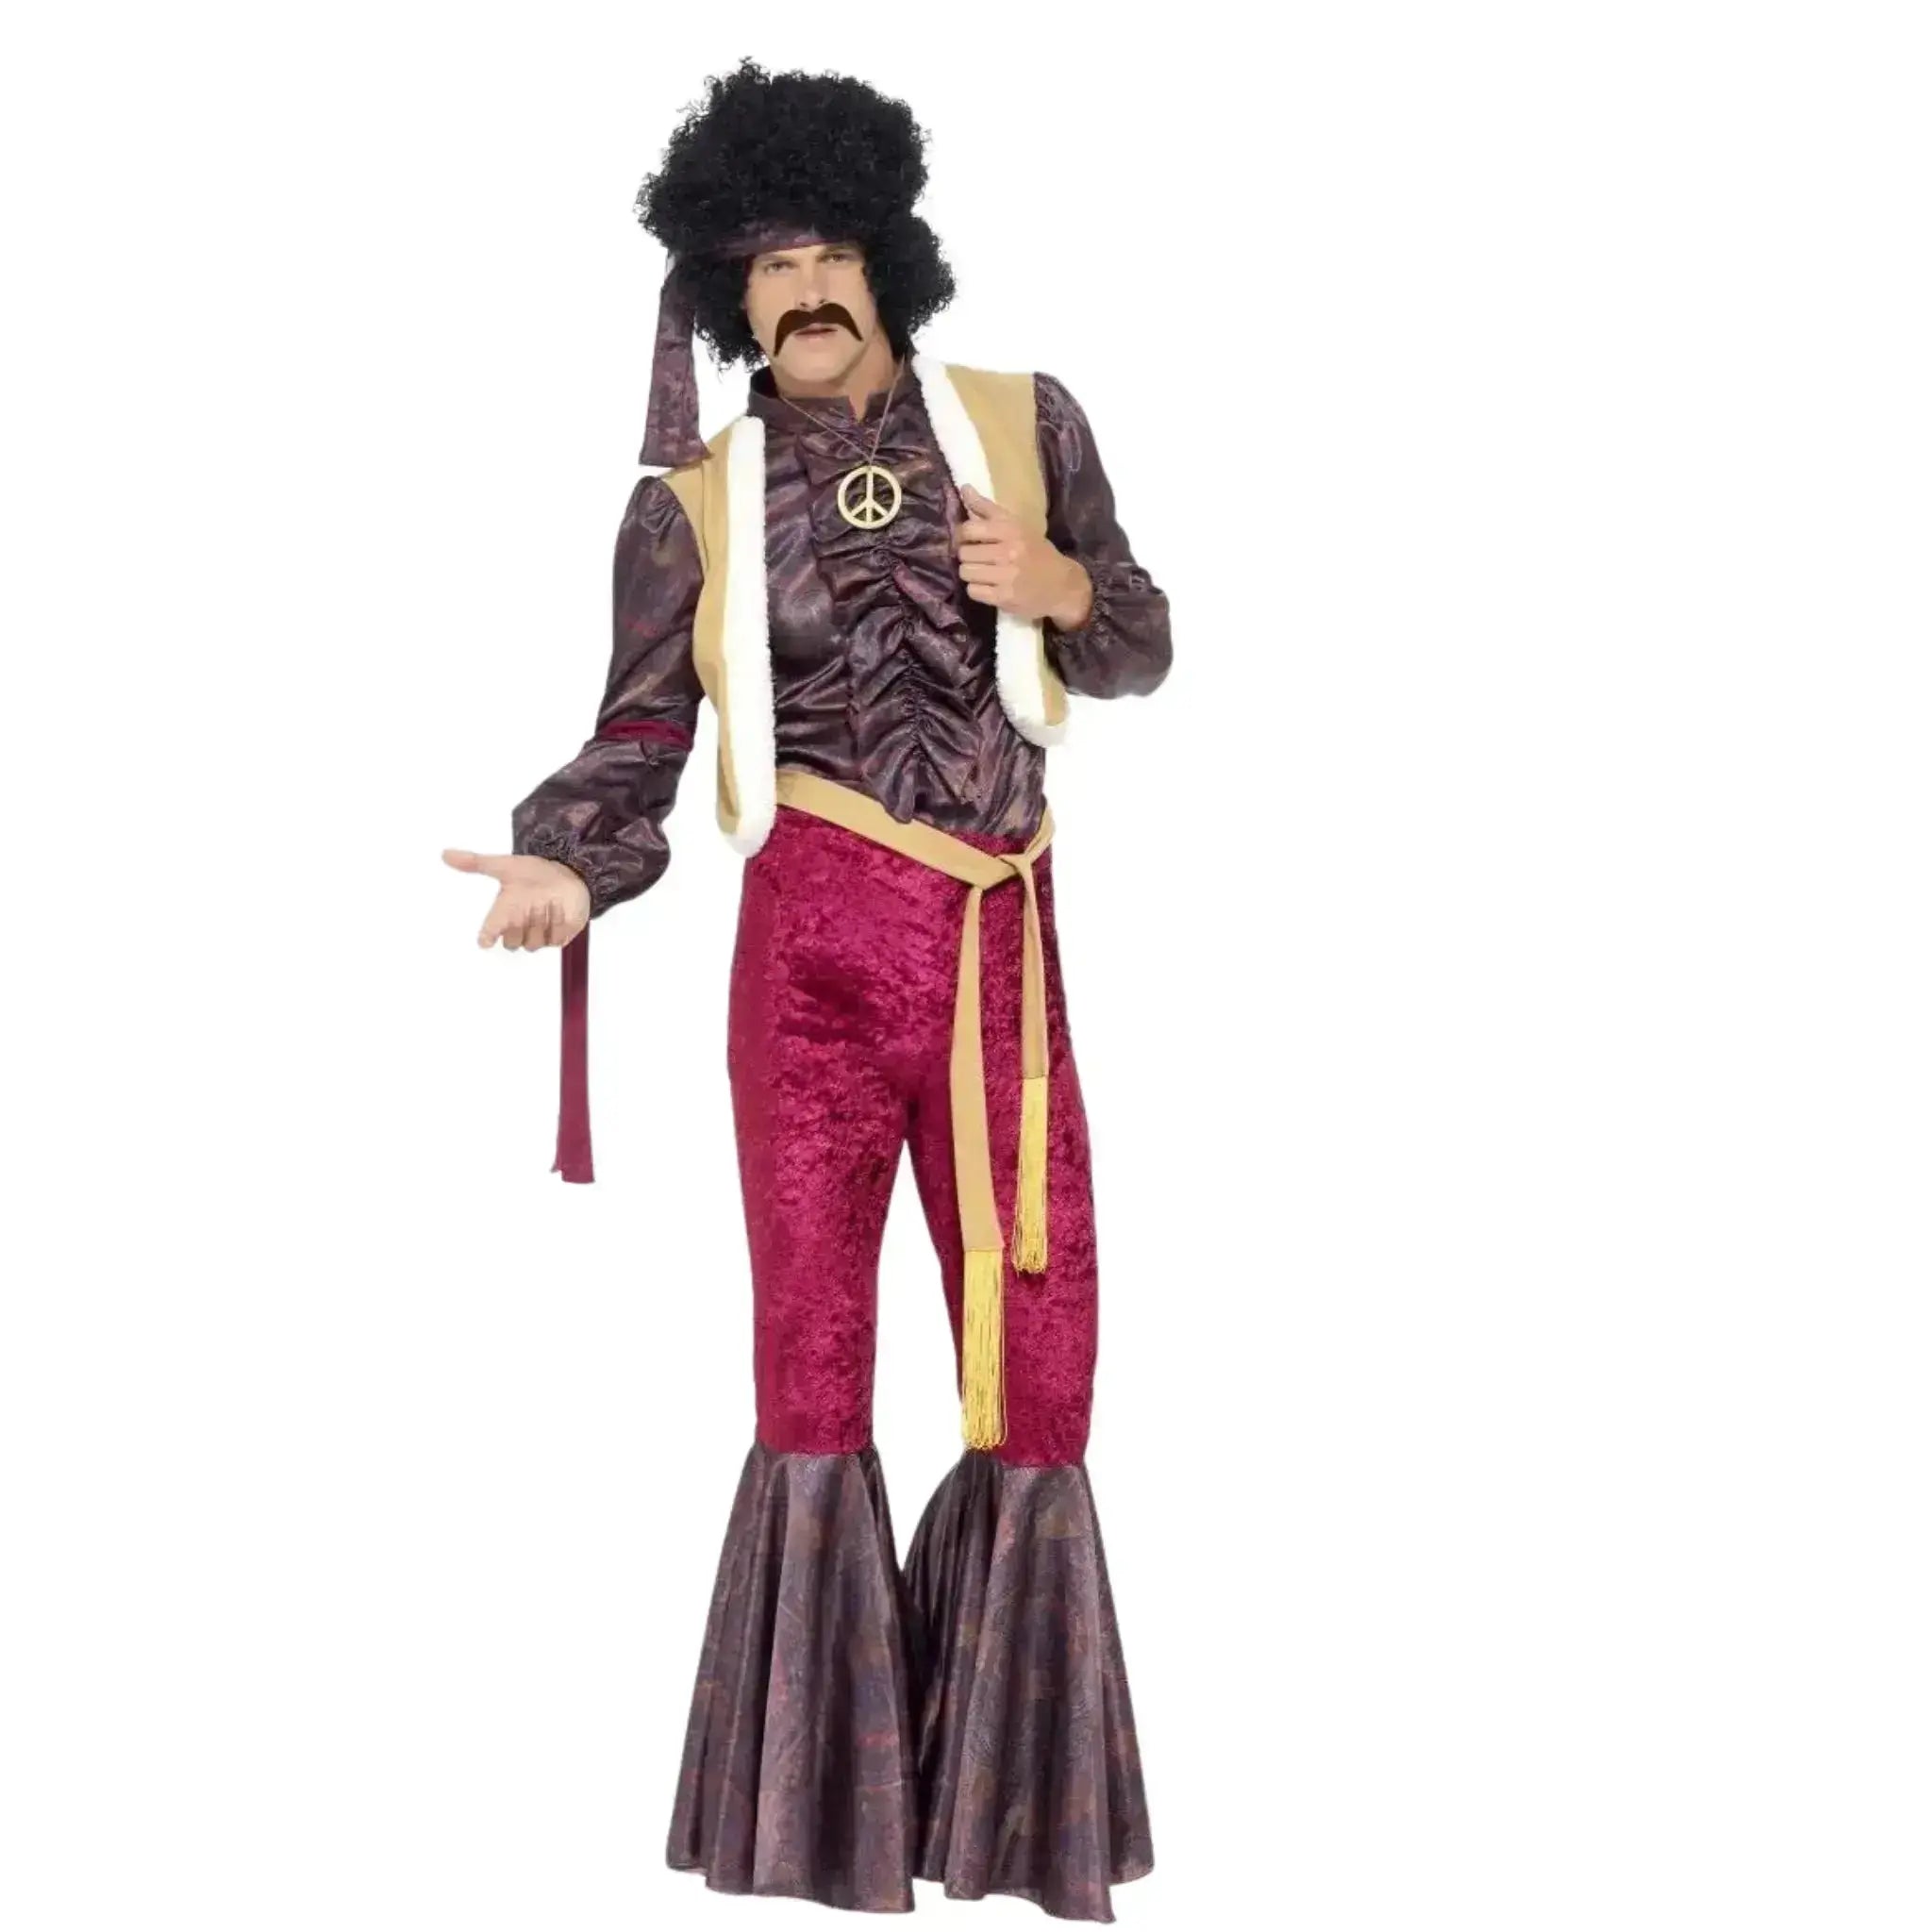 1970s Psychedelic Rocker Costume | The Party Hut